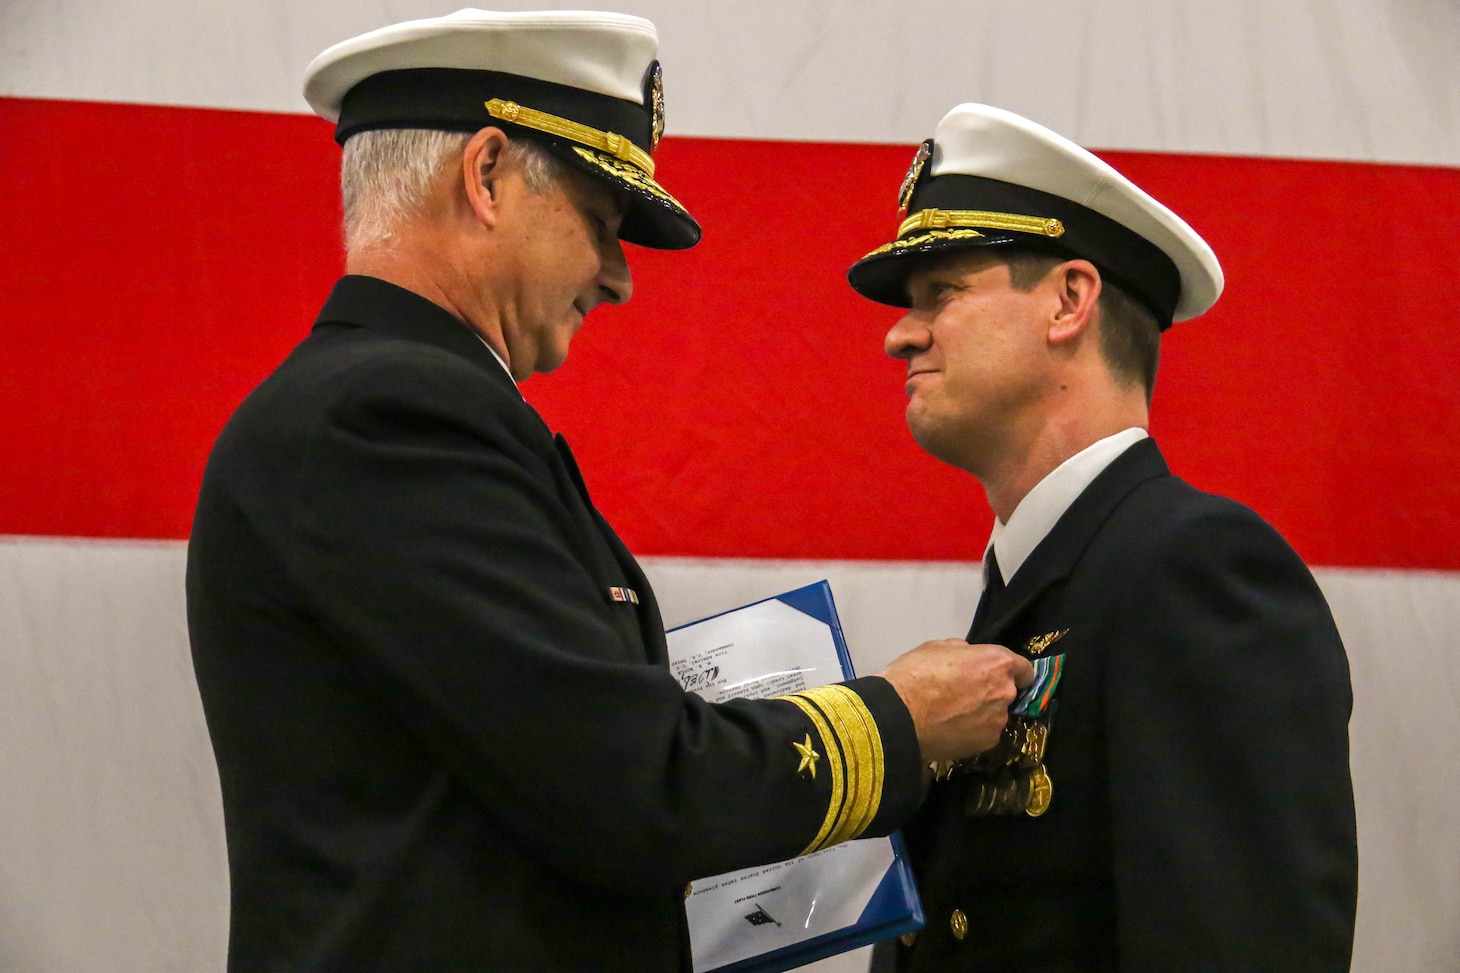 240202-N-IJ992-1429 OAK HARBOR, Wash. (Feb. 02, 2024) Rear Adm. Doug Verissimo, Commander Naval Air Forces, left, awards Capt. David Harris during the change of command ceremony of Electronic Attack Wing, U.S. Pacific Fleet, aboard Naval Air Station Whidbey Island (NASWI). Capt. David A. Ganci relieved Capt. David F. Harris as the commanding officer. (U.S. Navy photo by Mass Communication Specialist 2nd Class Andy Anderson)